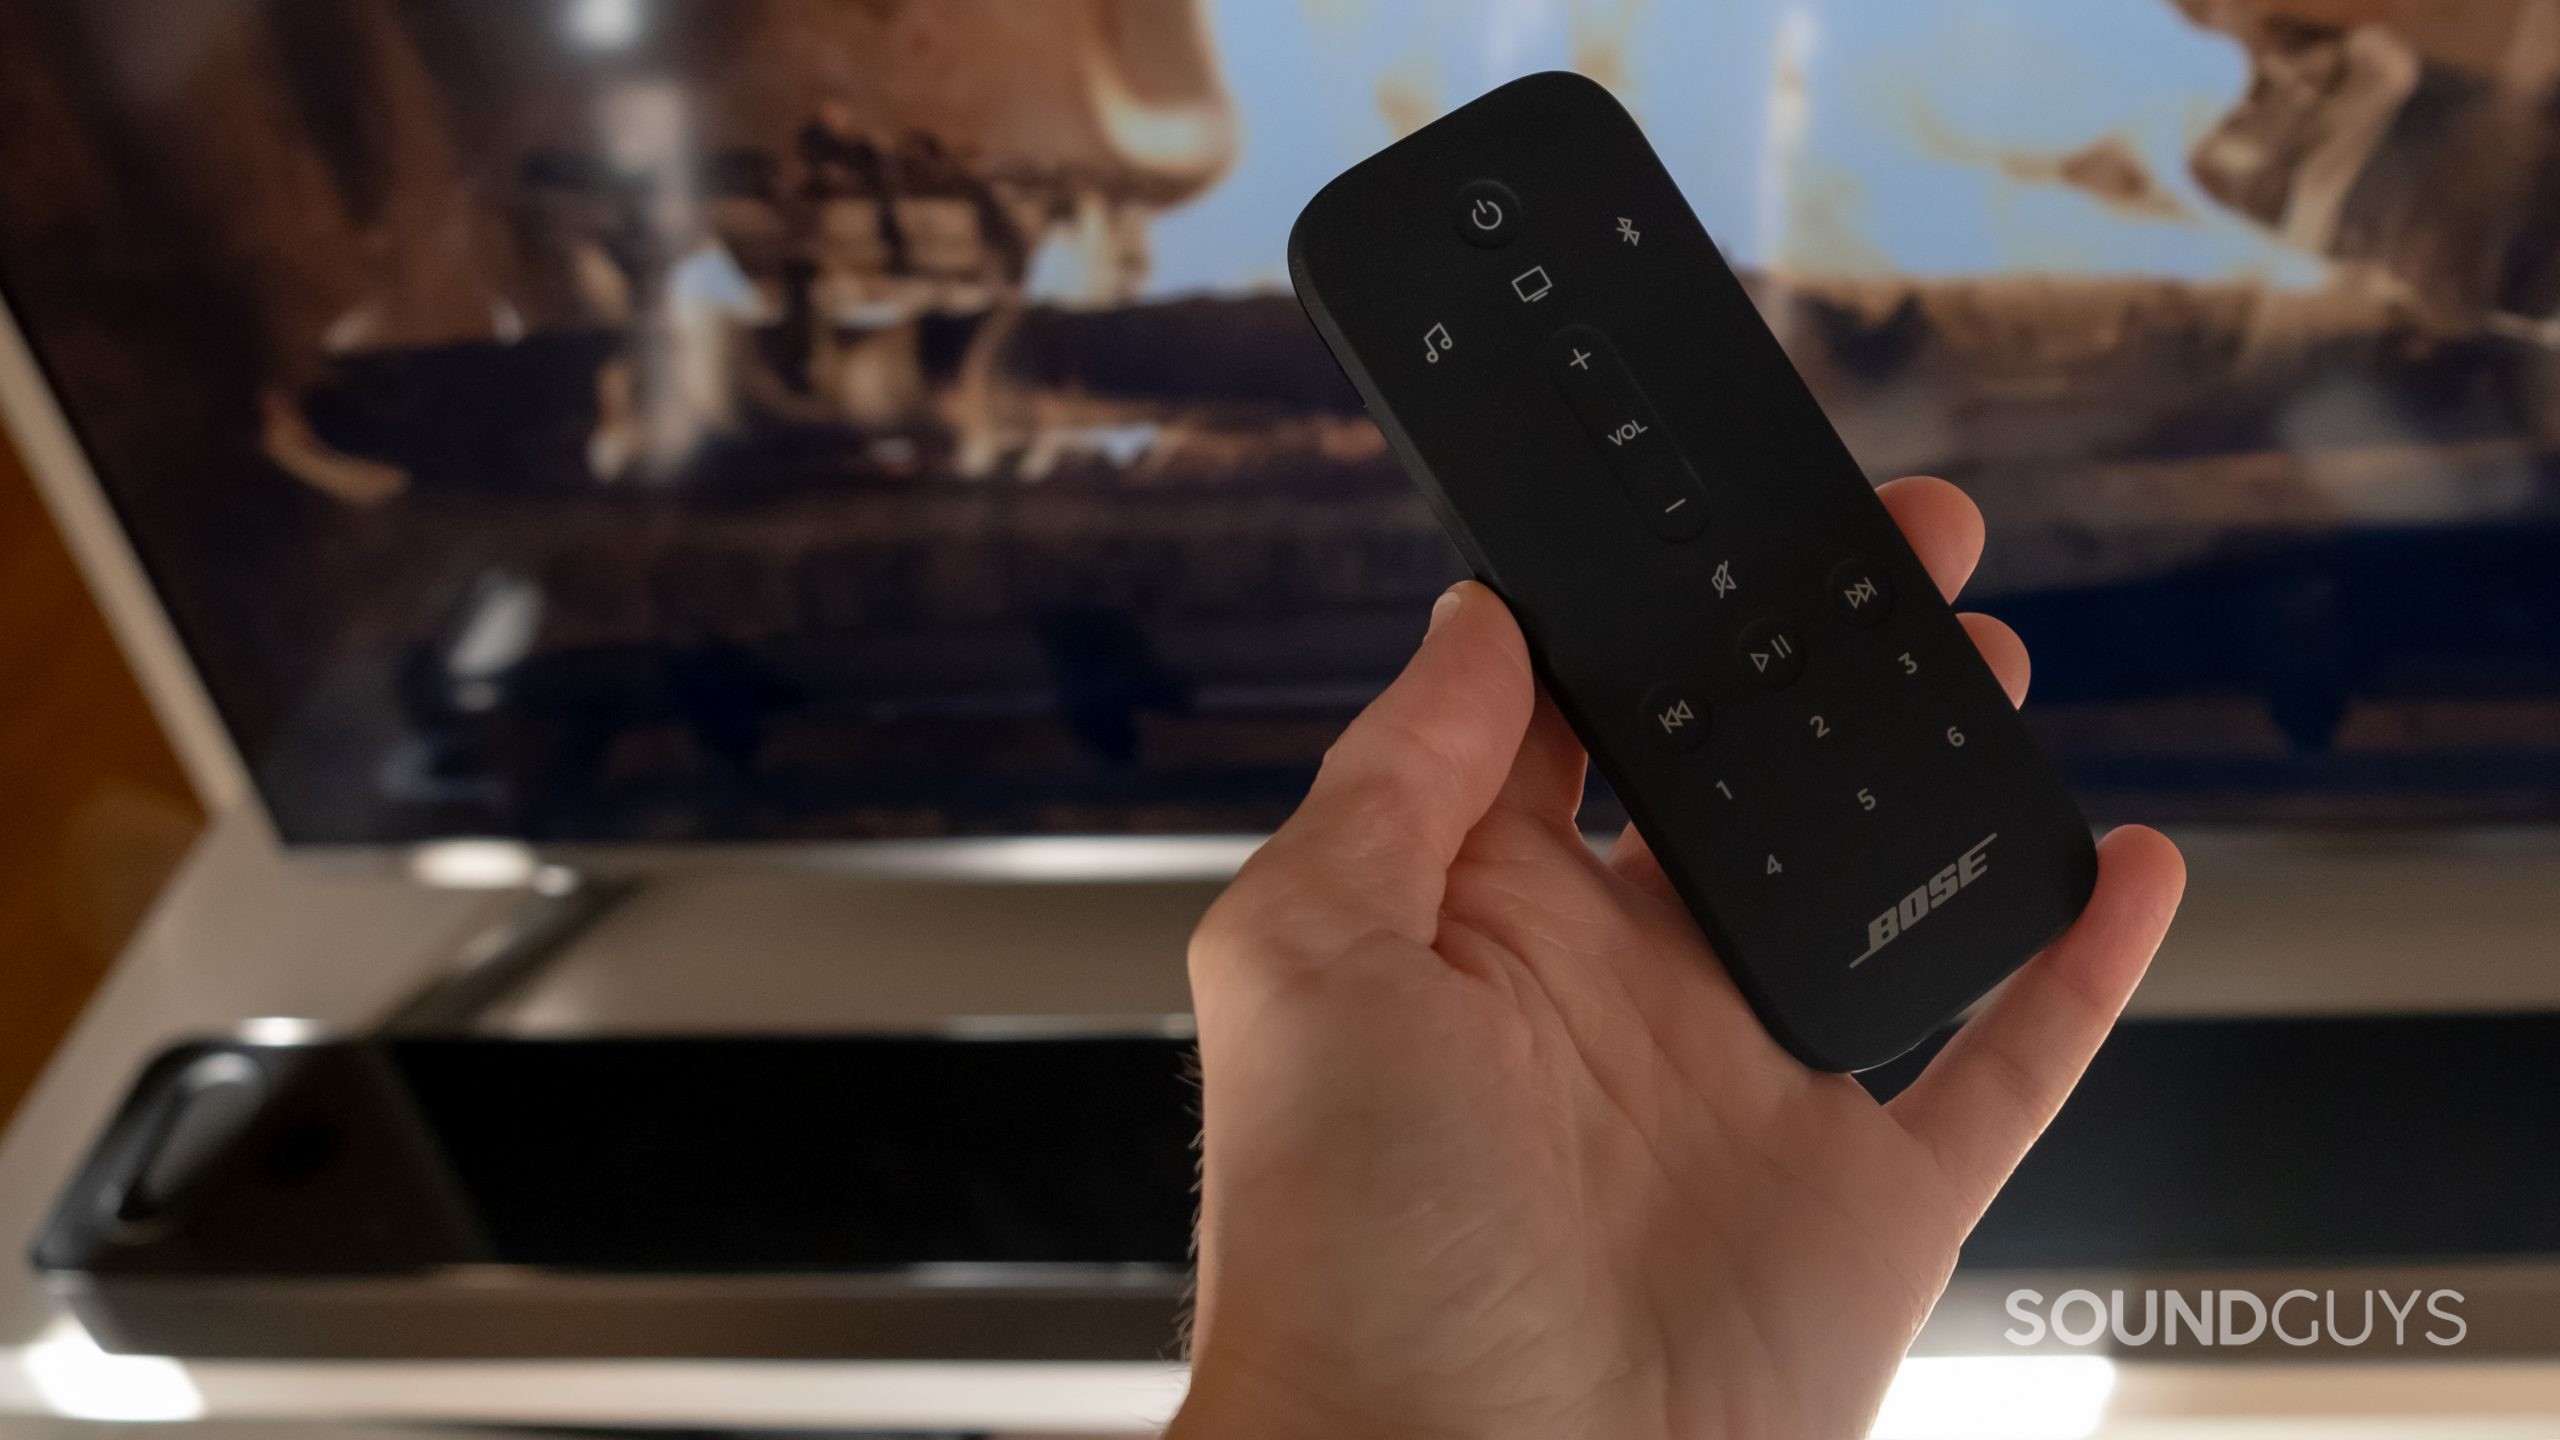 A hand holds the remote that comes with the Bose Smart Soundbar 900 in front of a TV and the soundbar itself in the background.